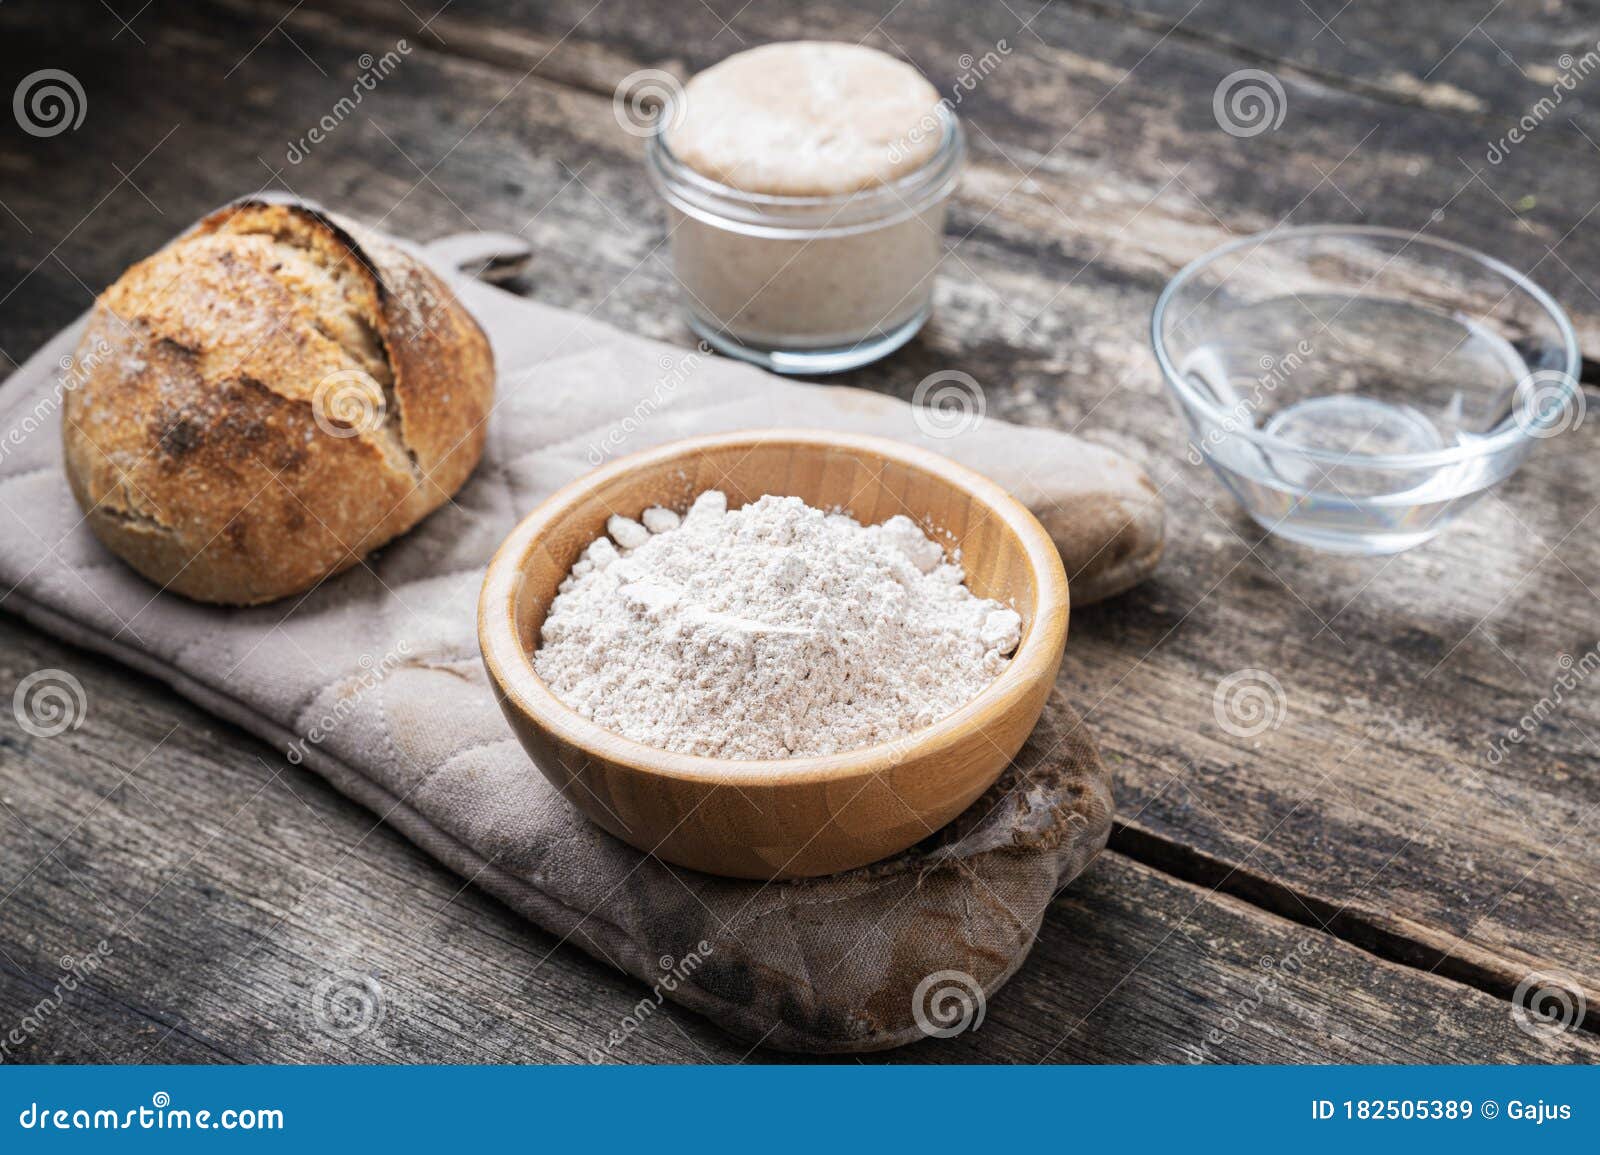 ingredients for home made sourdough bread